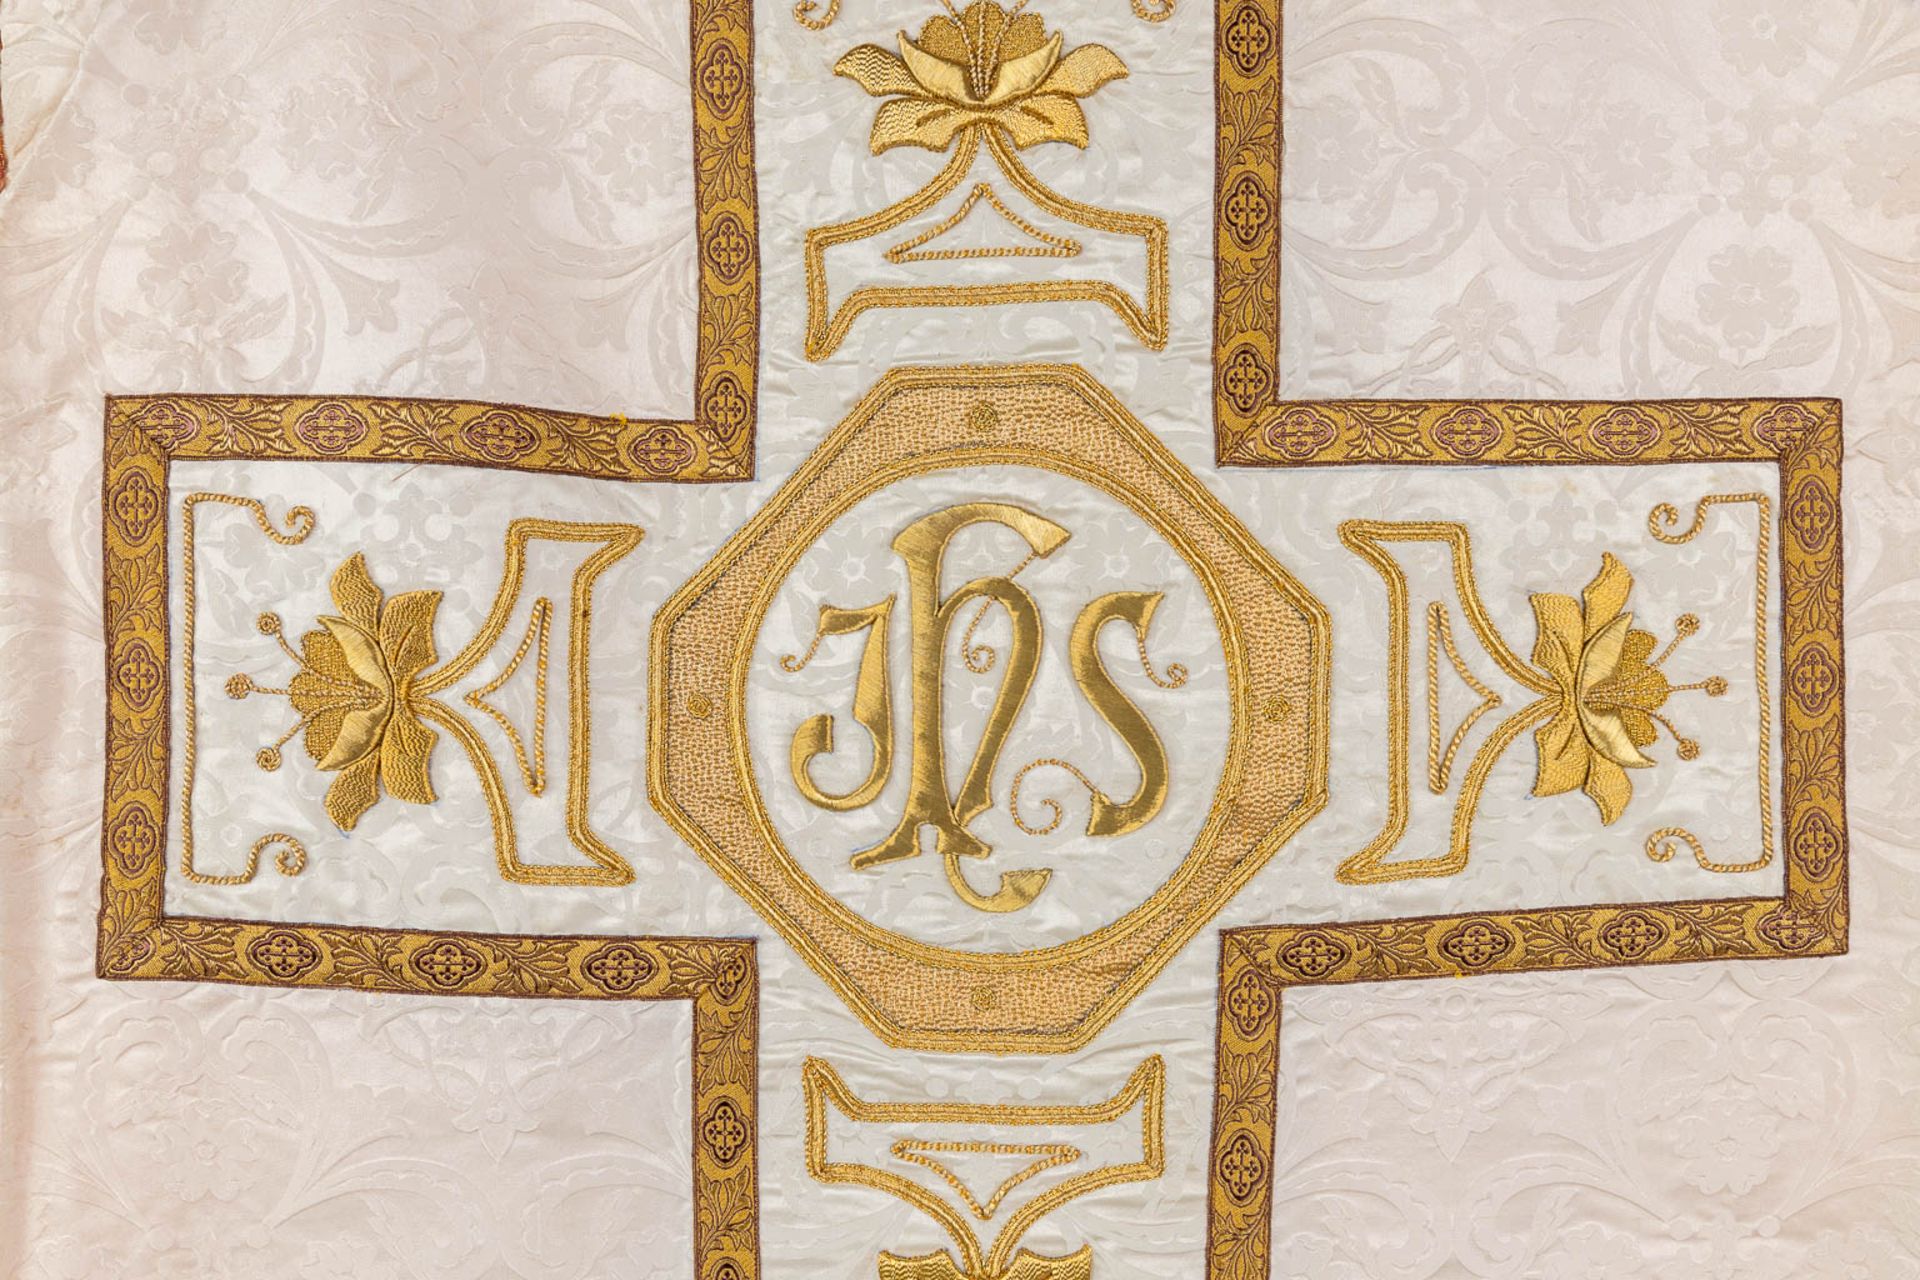 A set of Lithurgical Robes and accessories. Thick gold thread and embroideries. - Image 12 of 40